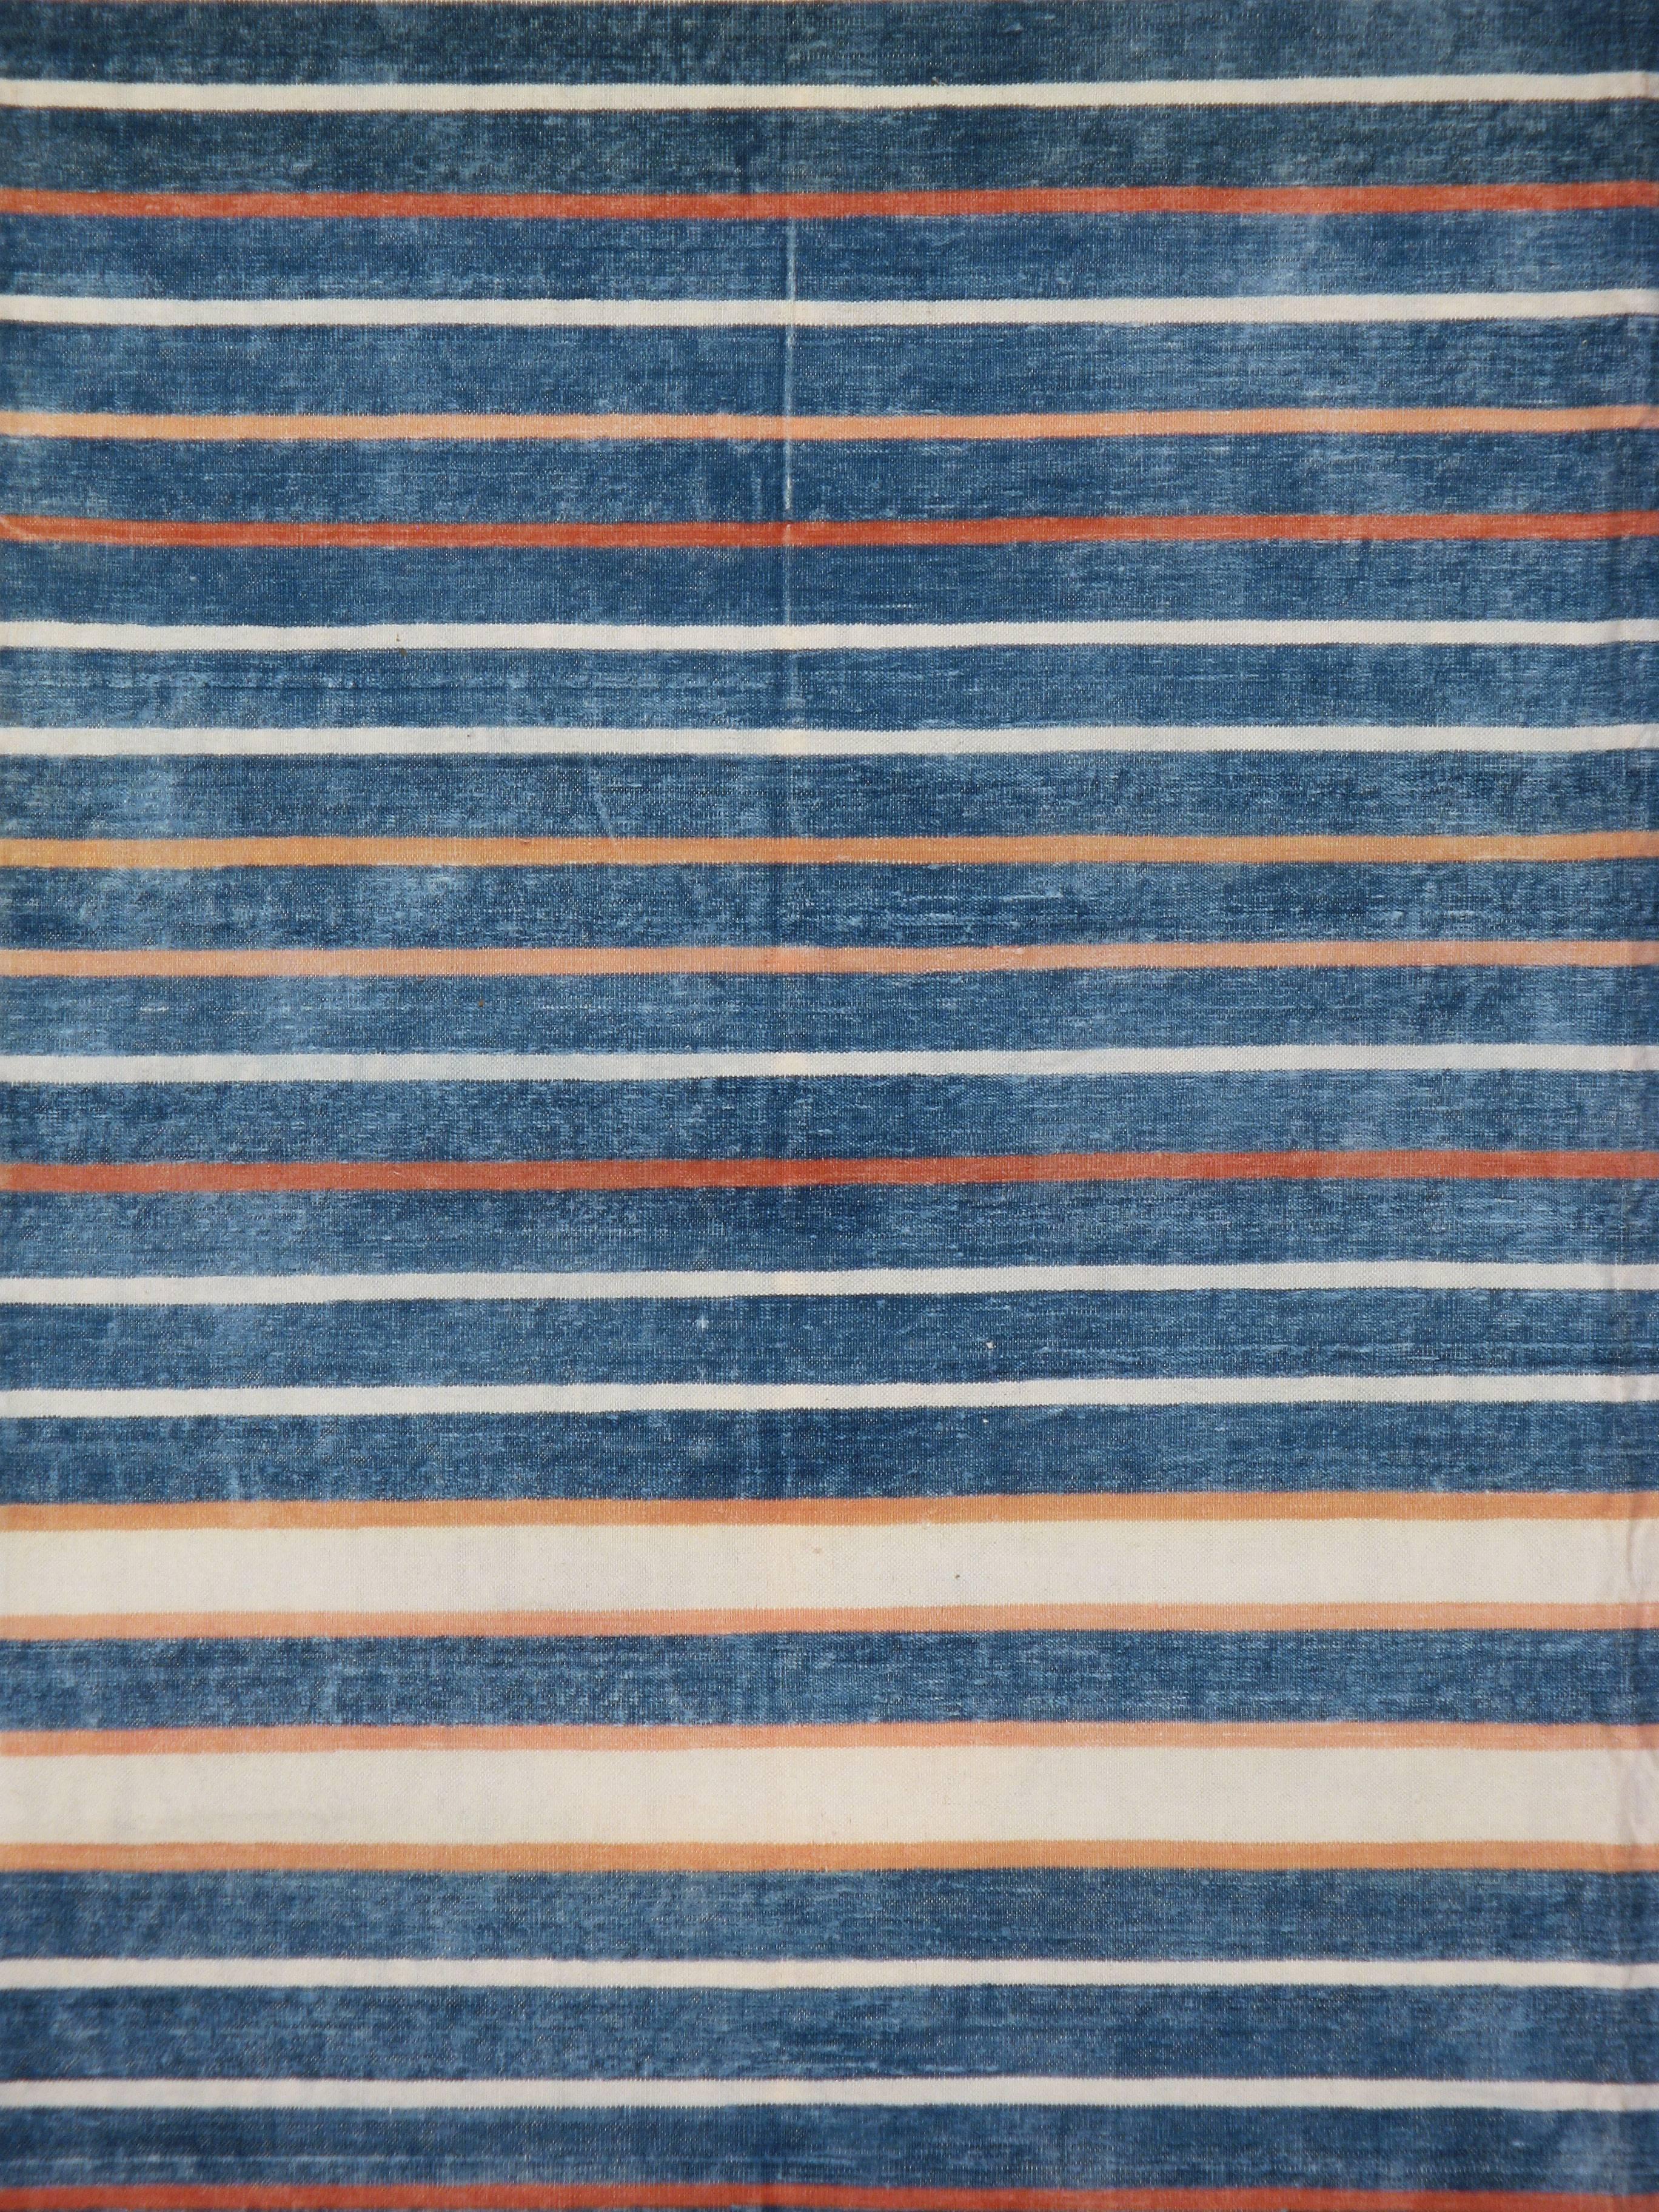 A vintage Indian flat-woven Dhurrie carpet from the mid-20th century.